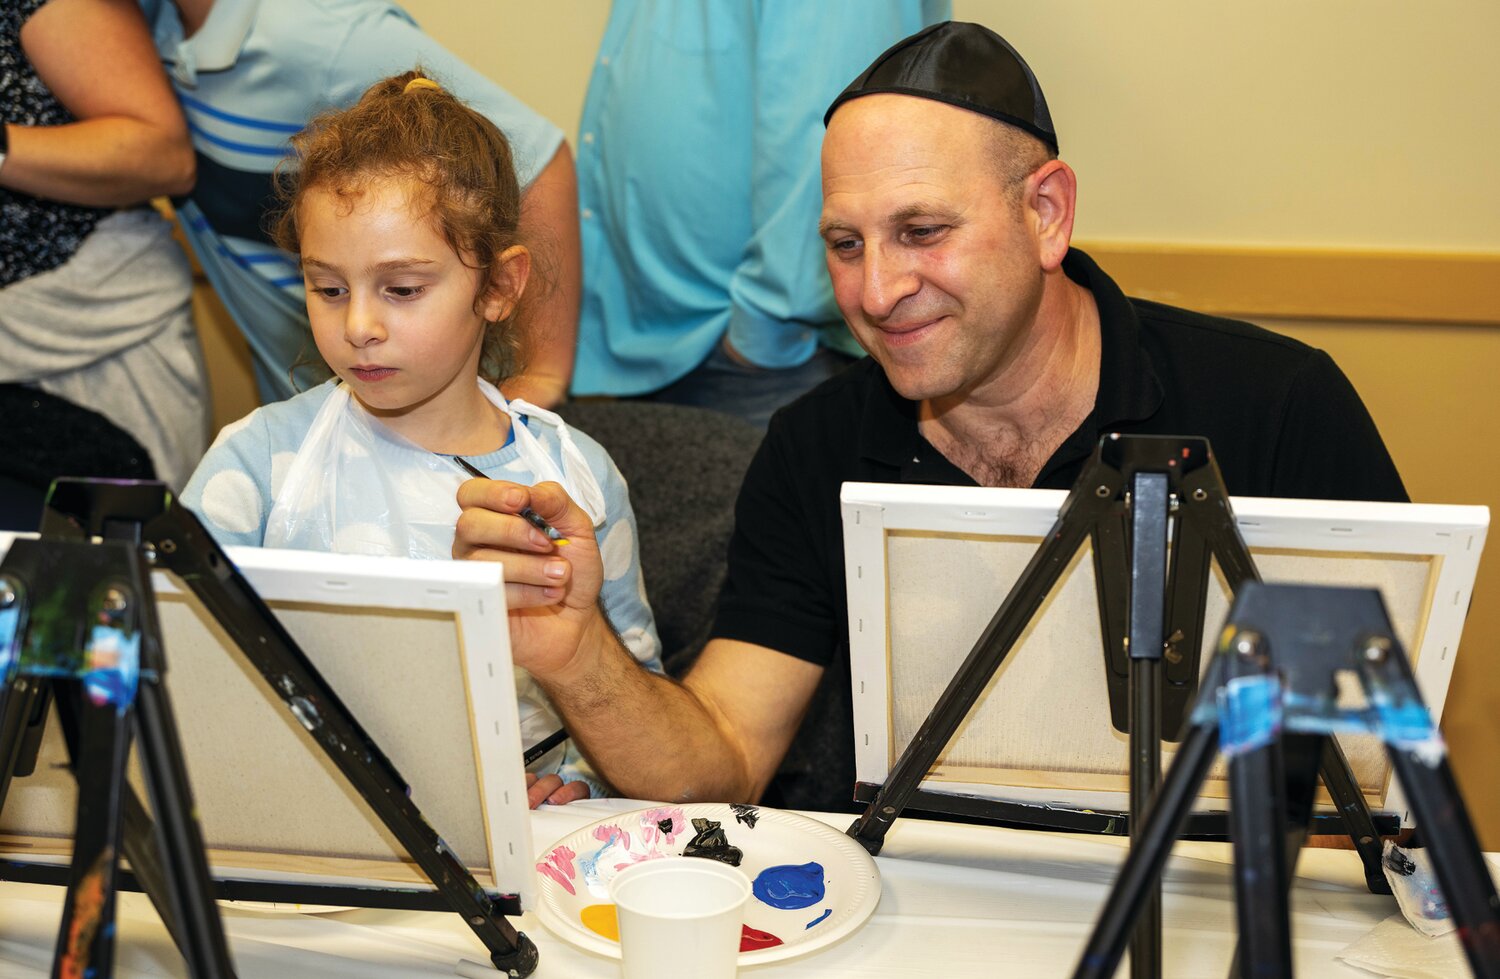 Mila Raz and her father, Real Raz, take part in a painting activity.